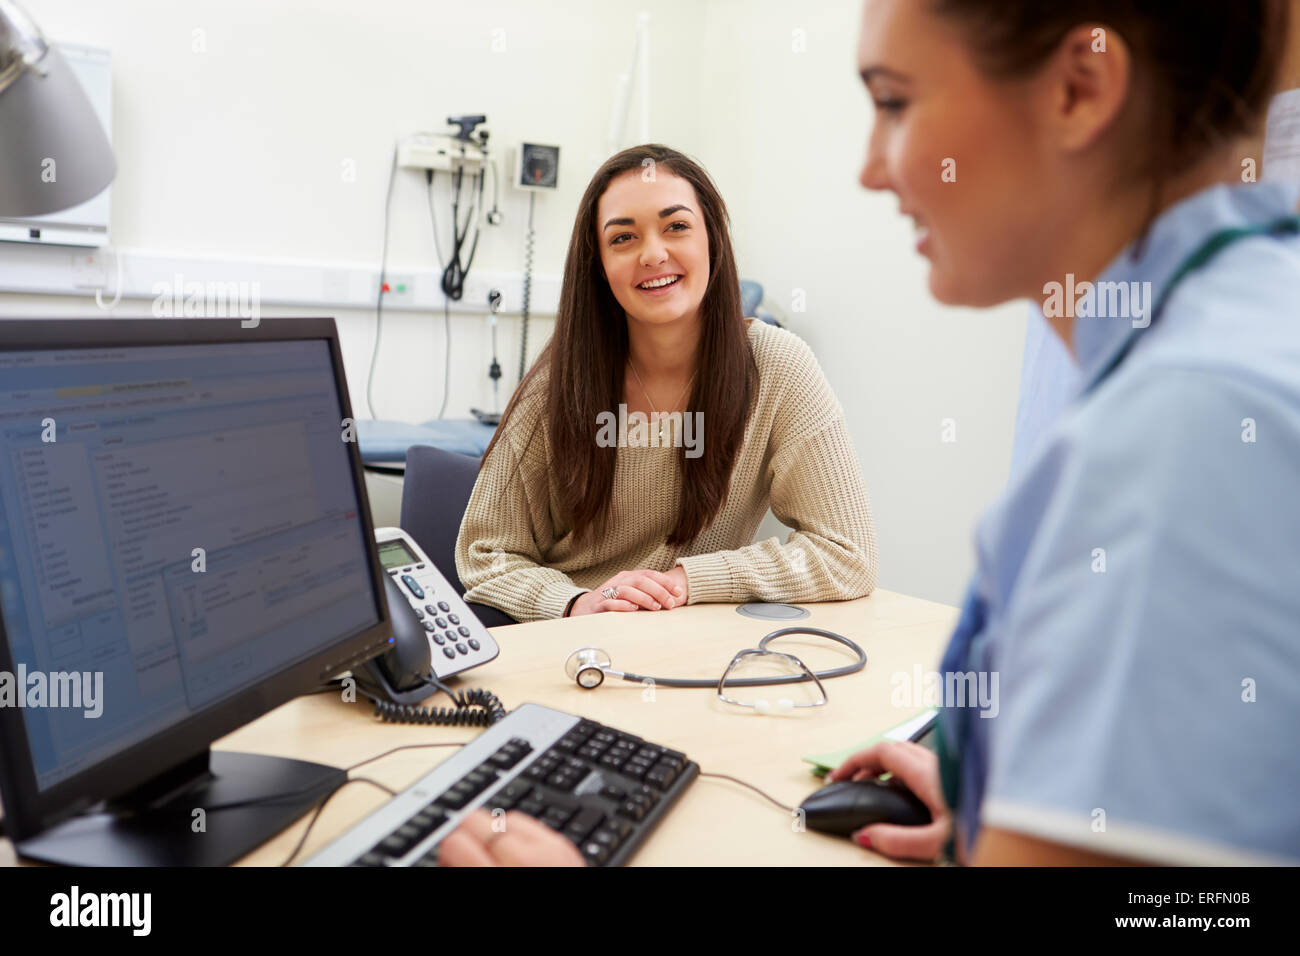 Teenage Girl Has Appointment With Nurse Stock Photo